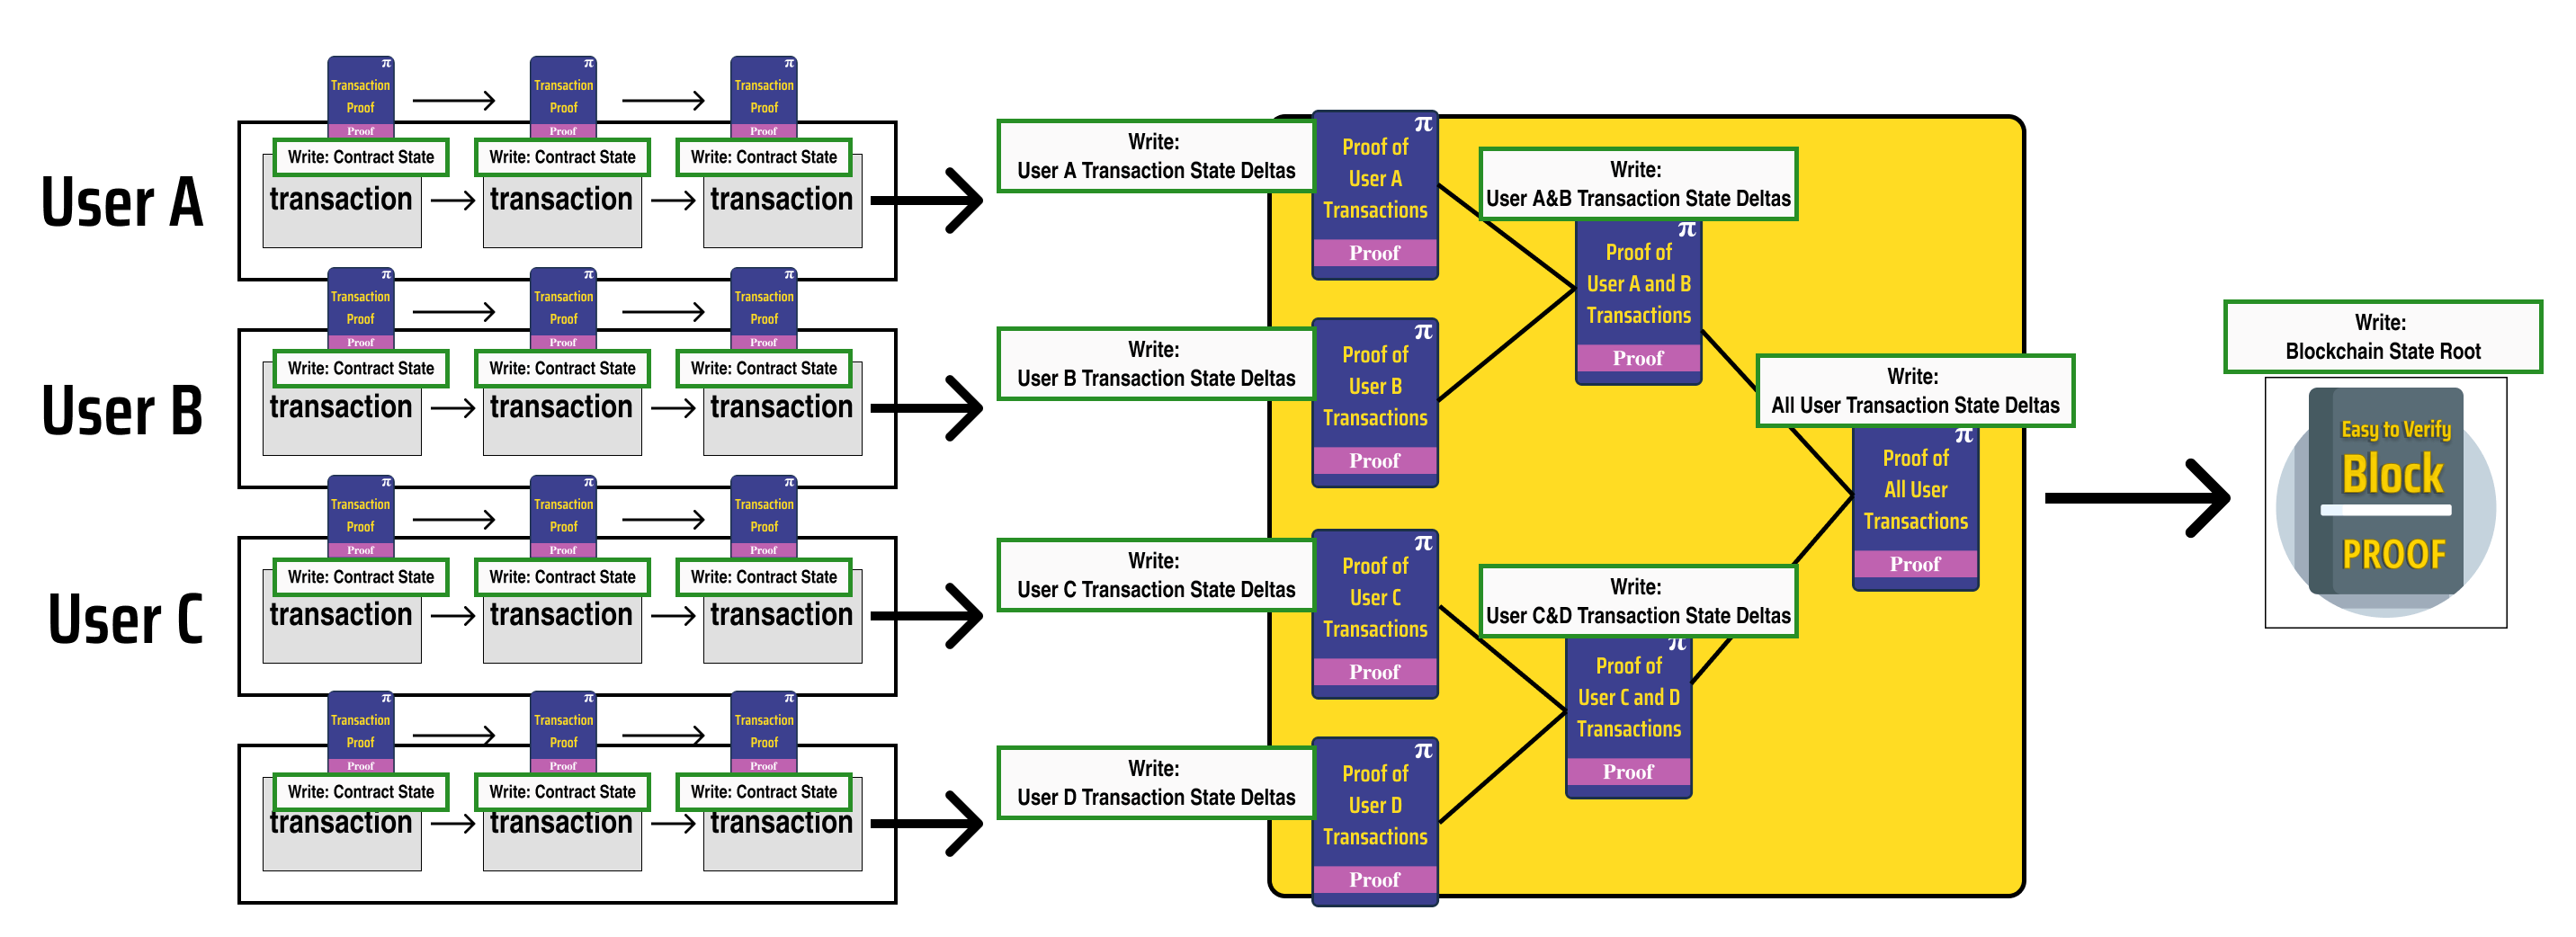 with-marked-diagram-full.png